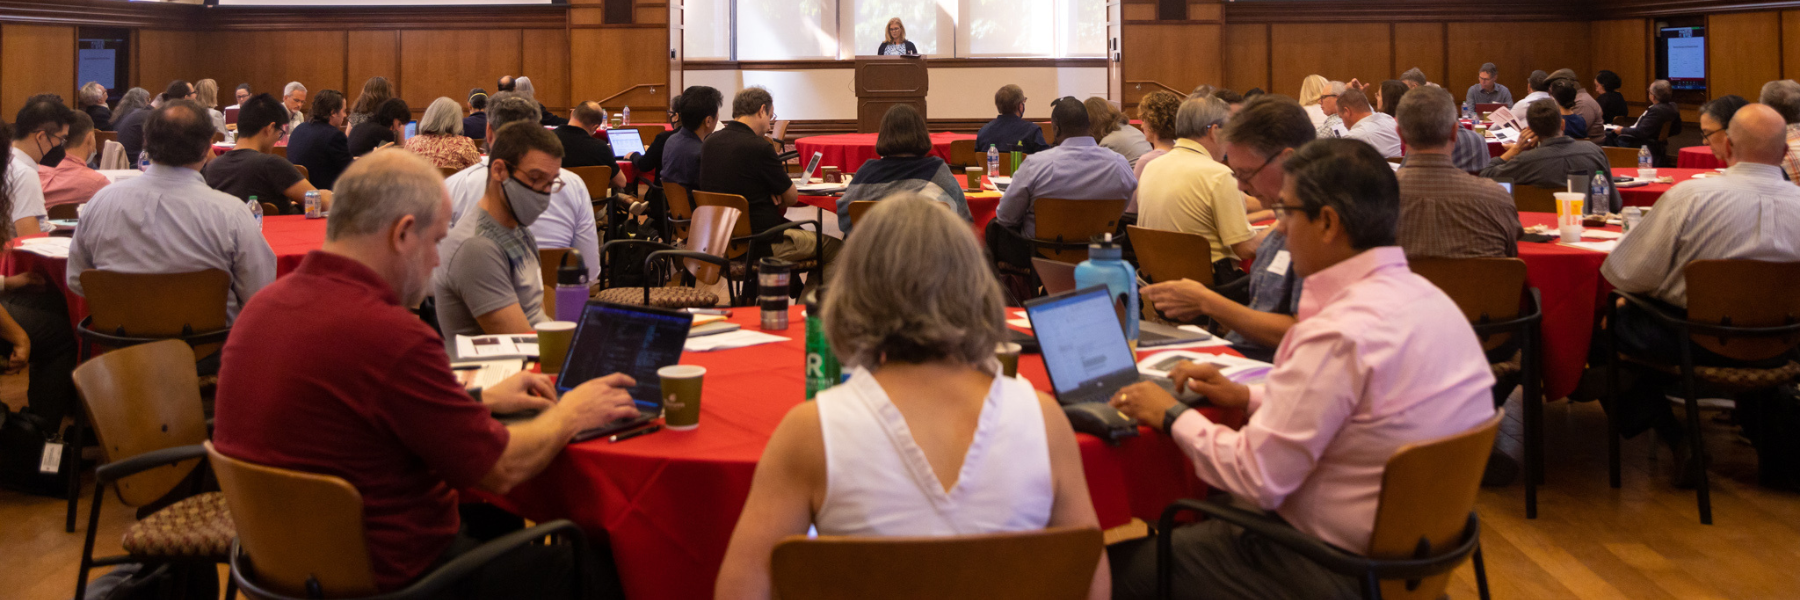 Groups of faculty sit at red, round tables looking through papers or at their laptops. The groups are turned towards a stage in the background of the image, where a blonde woman is speaking at a podium. She is centered on the stage with two screens presenting slides of information.